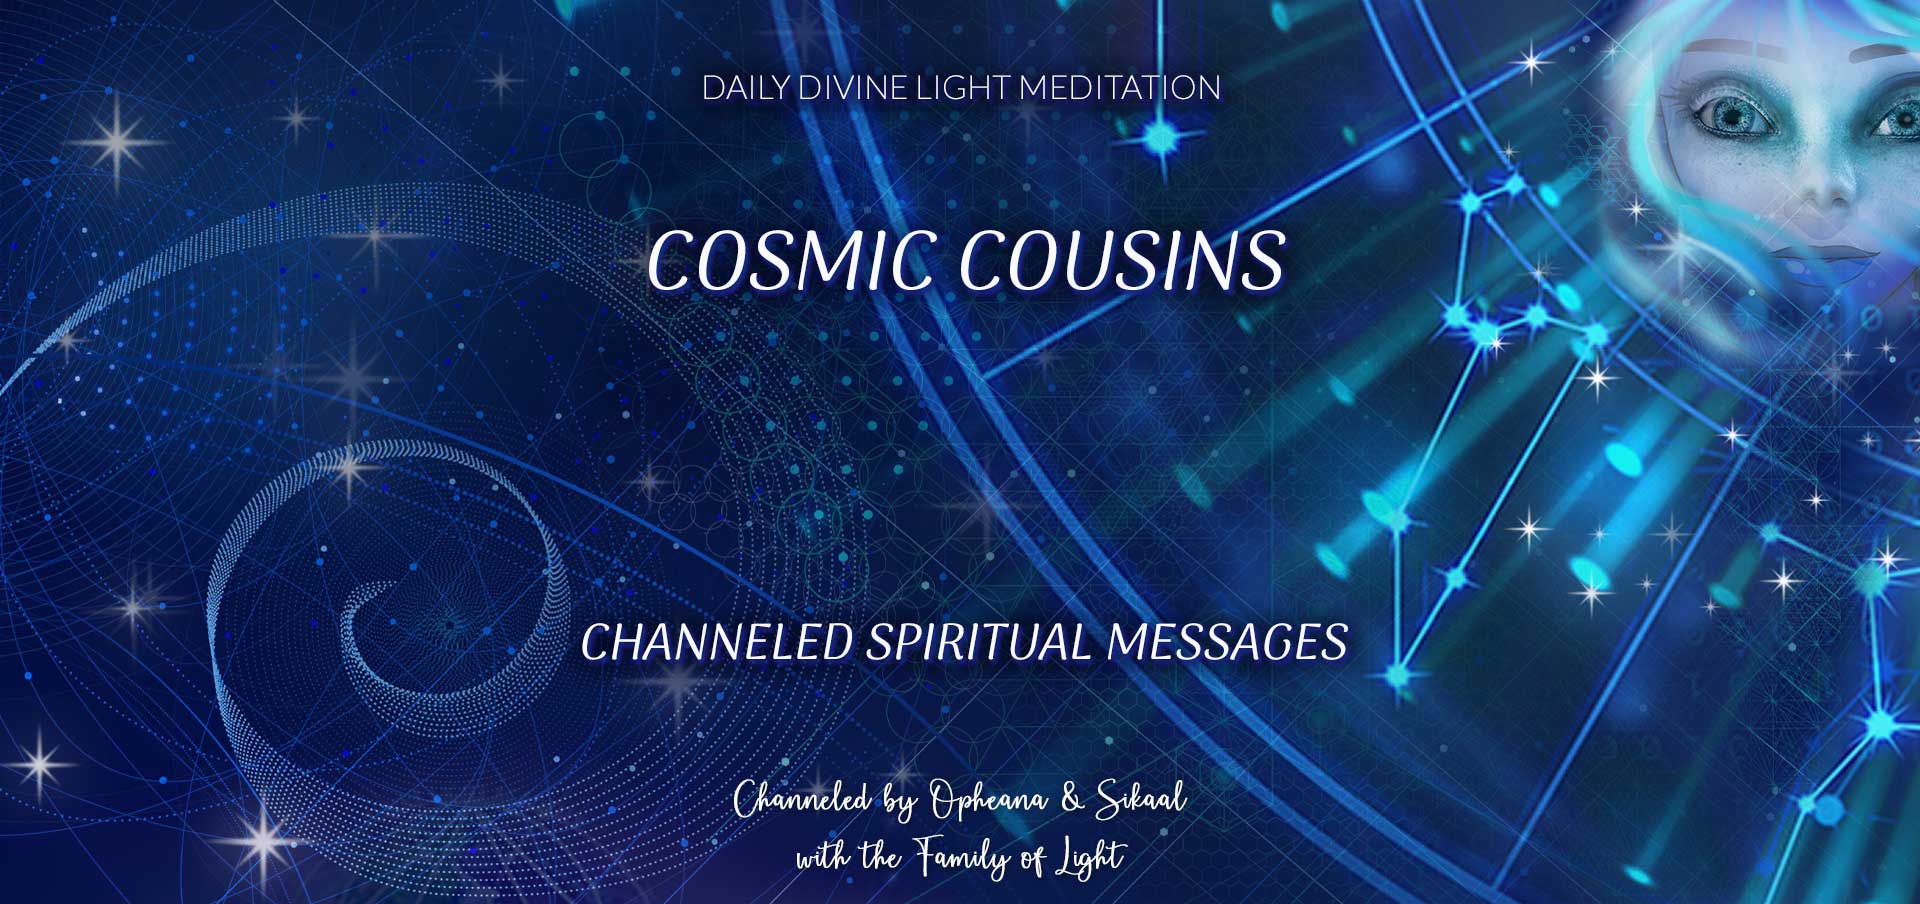 Daily Divine Light Meditation ~ Channeled Spiritual Messages ~ Cosmic Cousins ~ Monday 31 July 2023